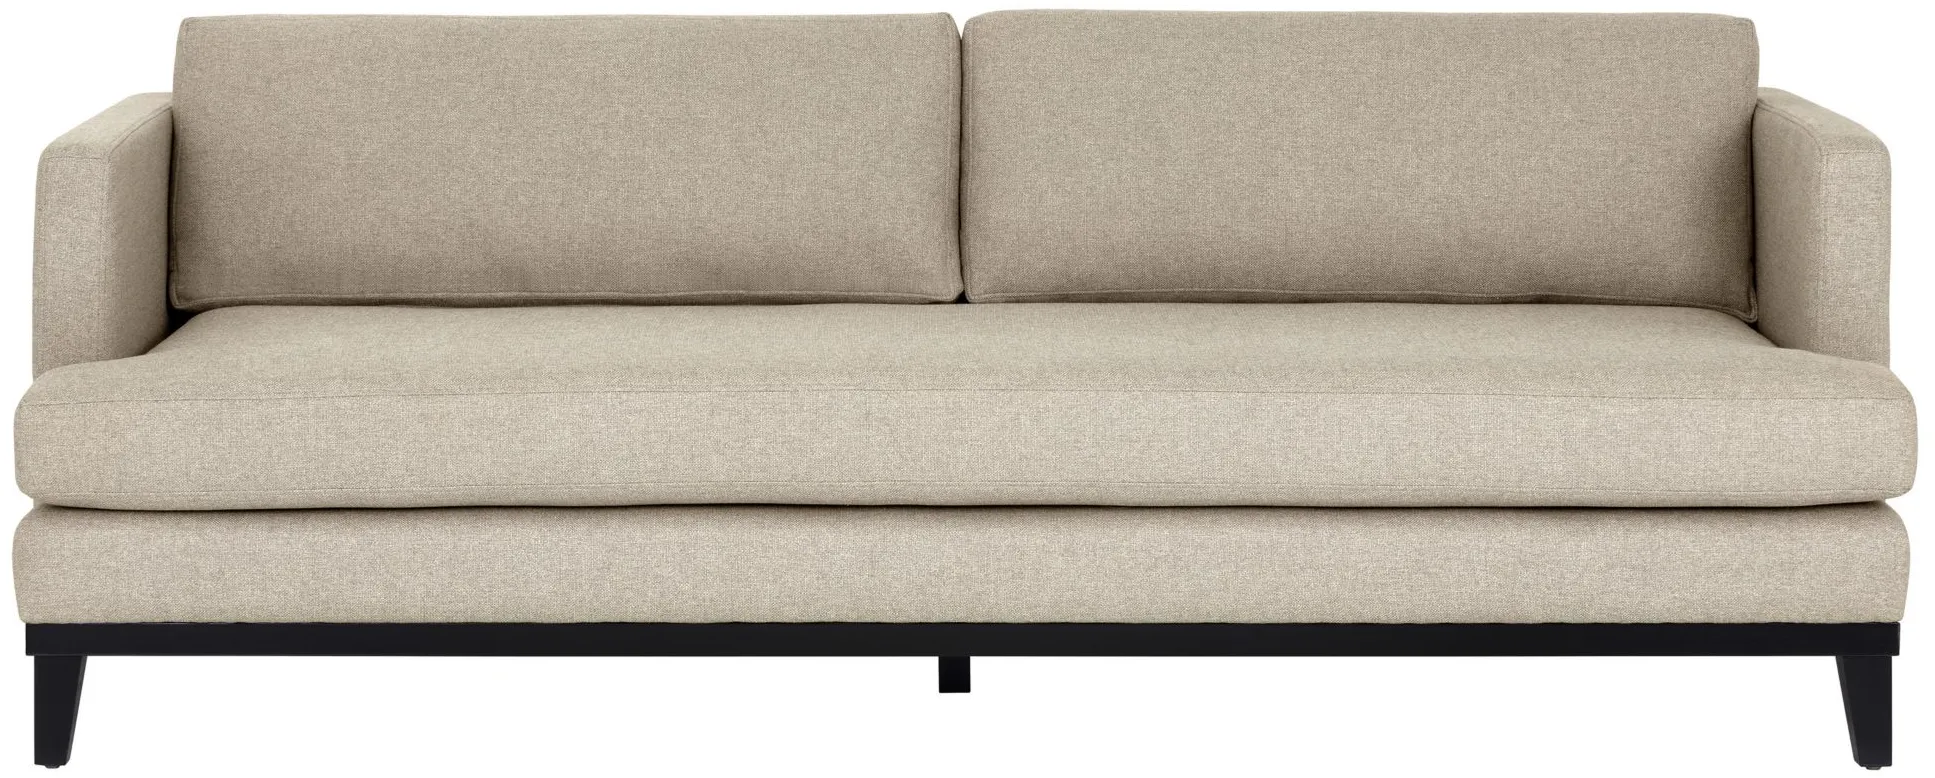 Kaius Sofa in Limelight Oat by Sunpan